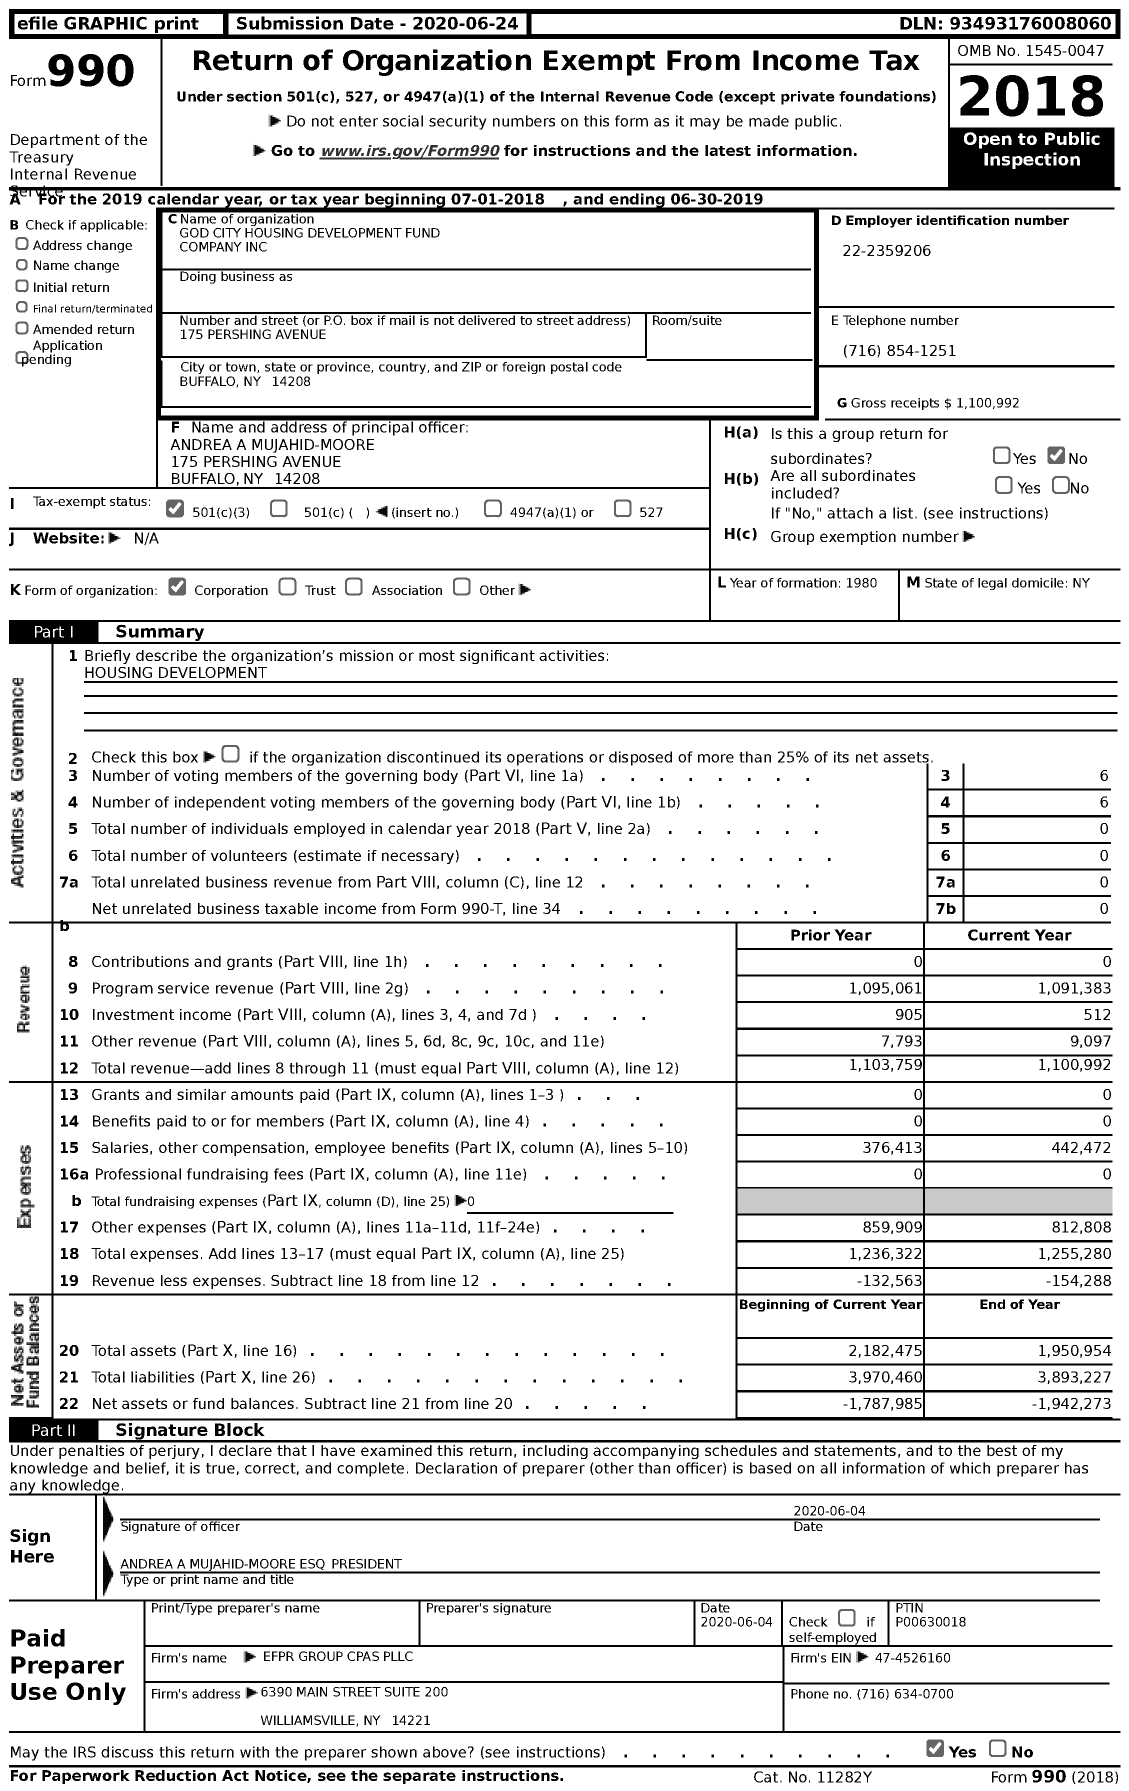 Image of first page of 2018 Form 990 for God City Housing Development Fund Company